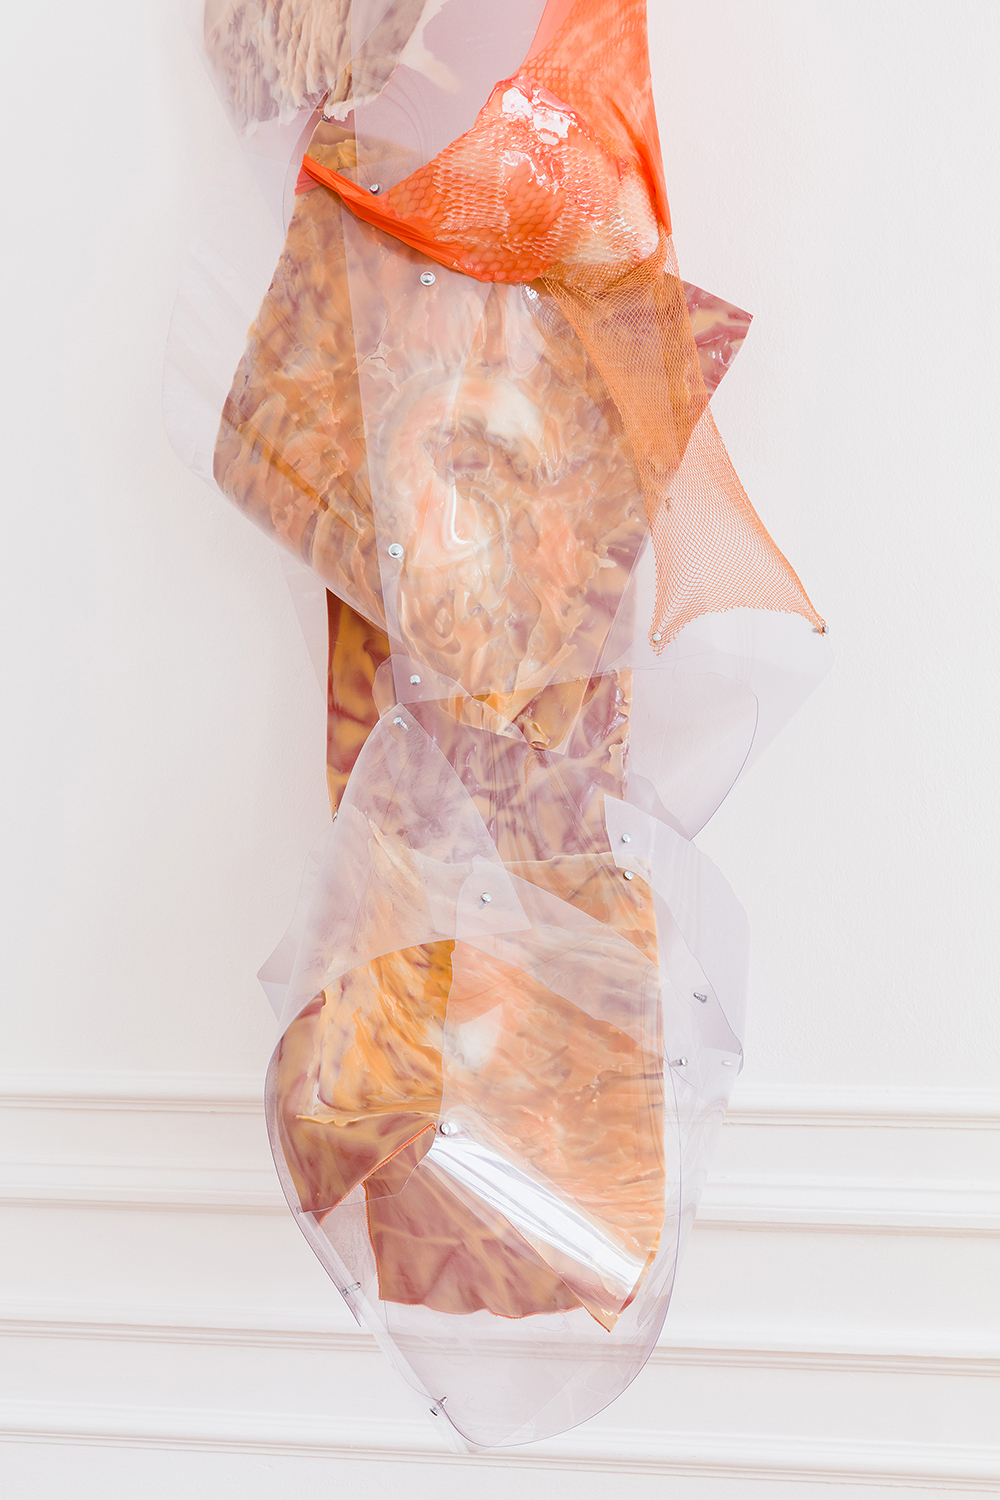 Sophie Hirsch you, non you, all you #1, 2020 Silicone, fabric, pigment, polycarbonate 95 x 310 x 91cm Detail view